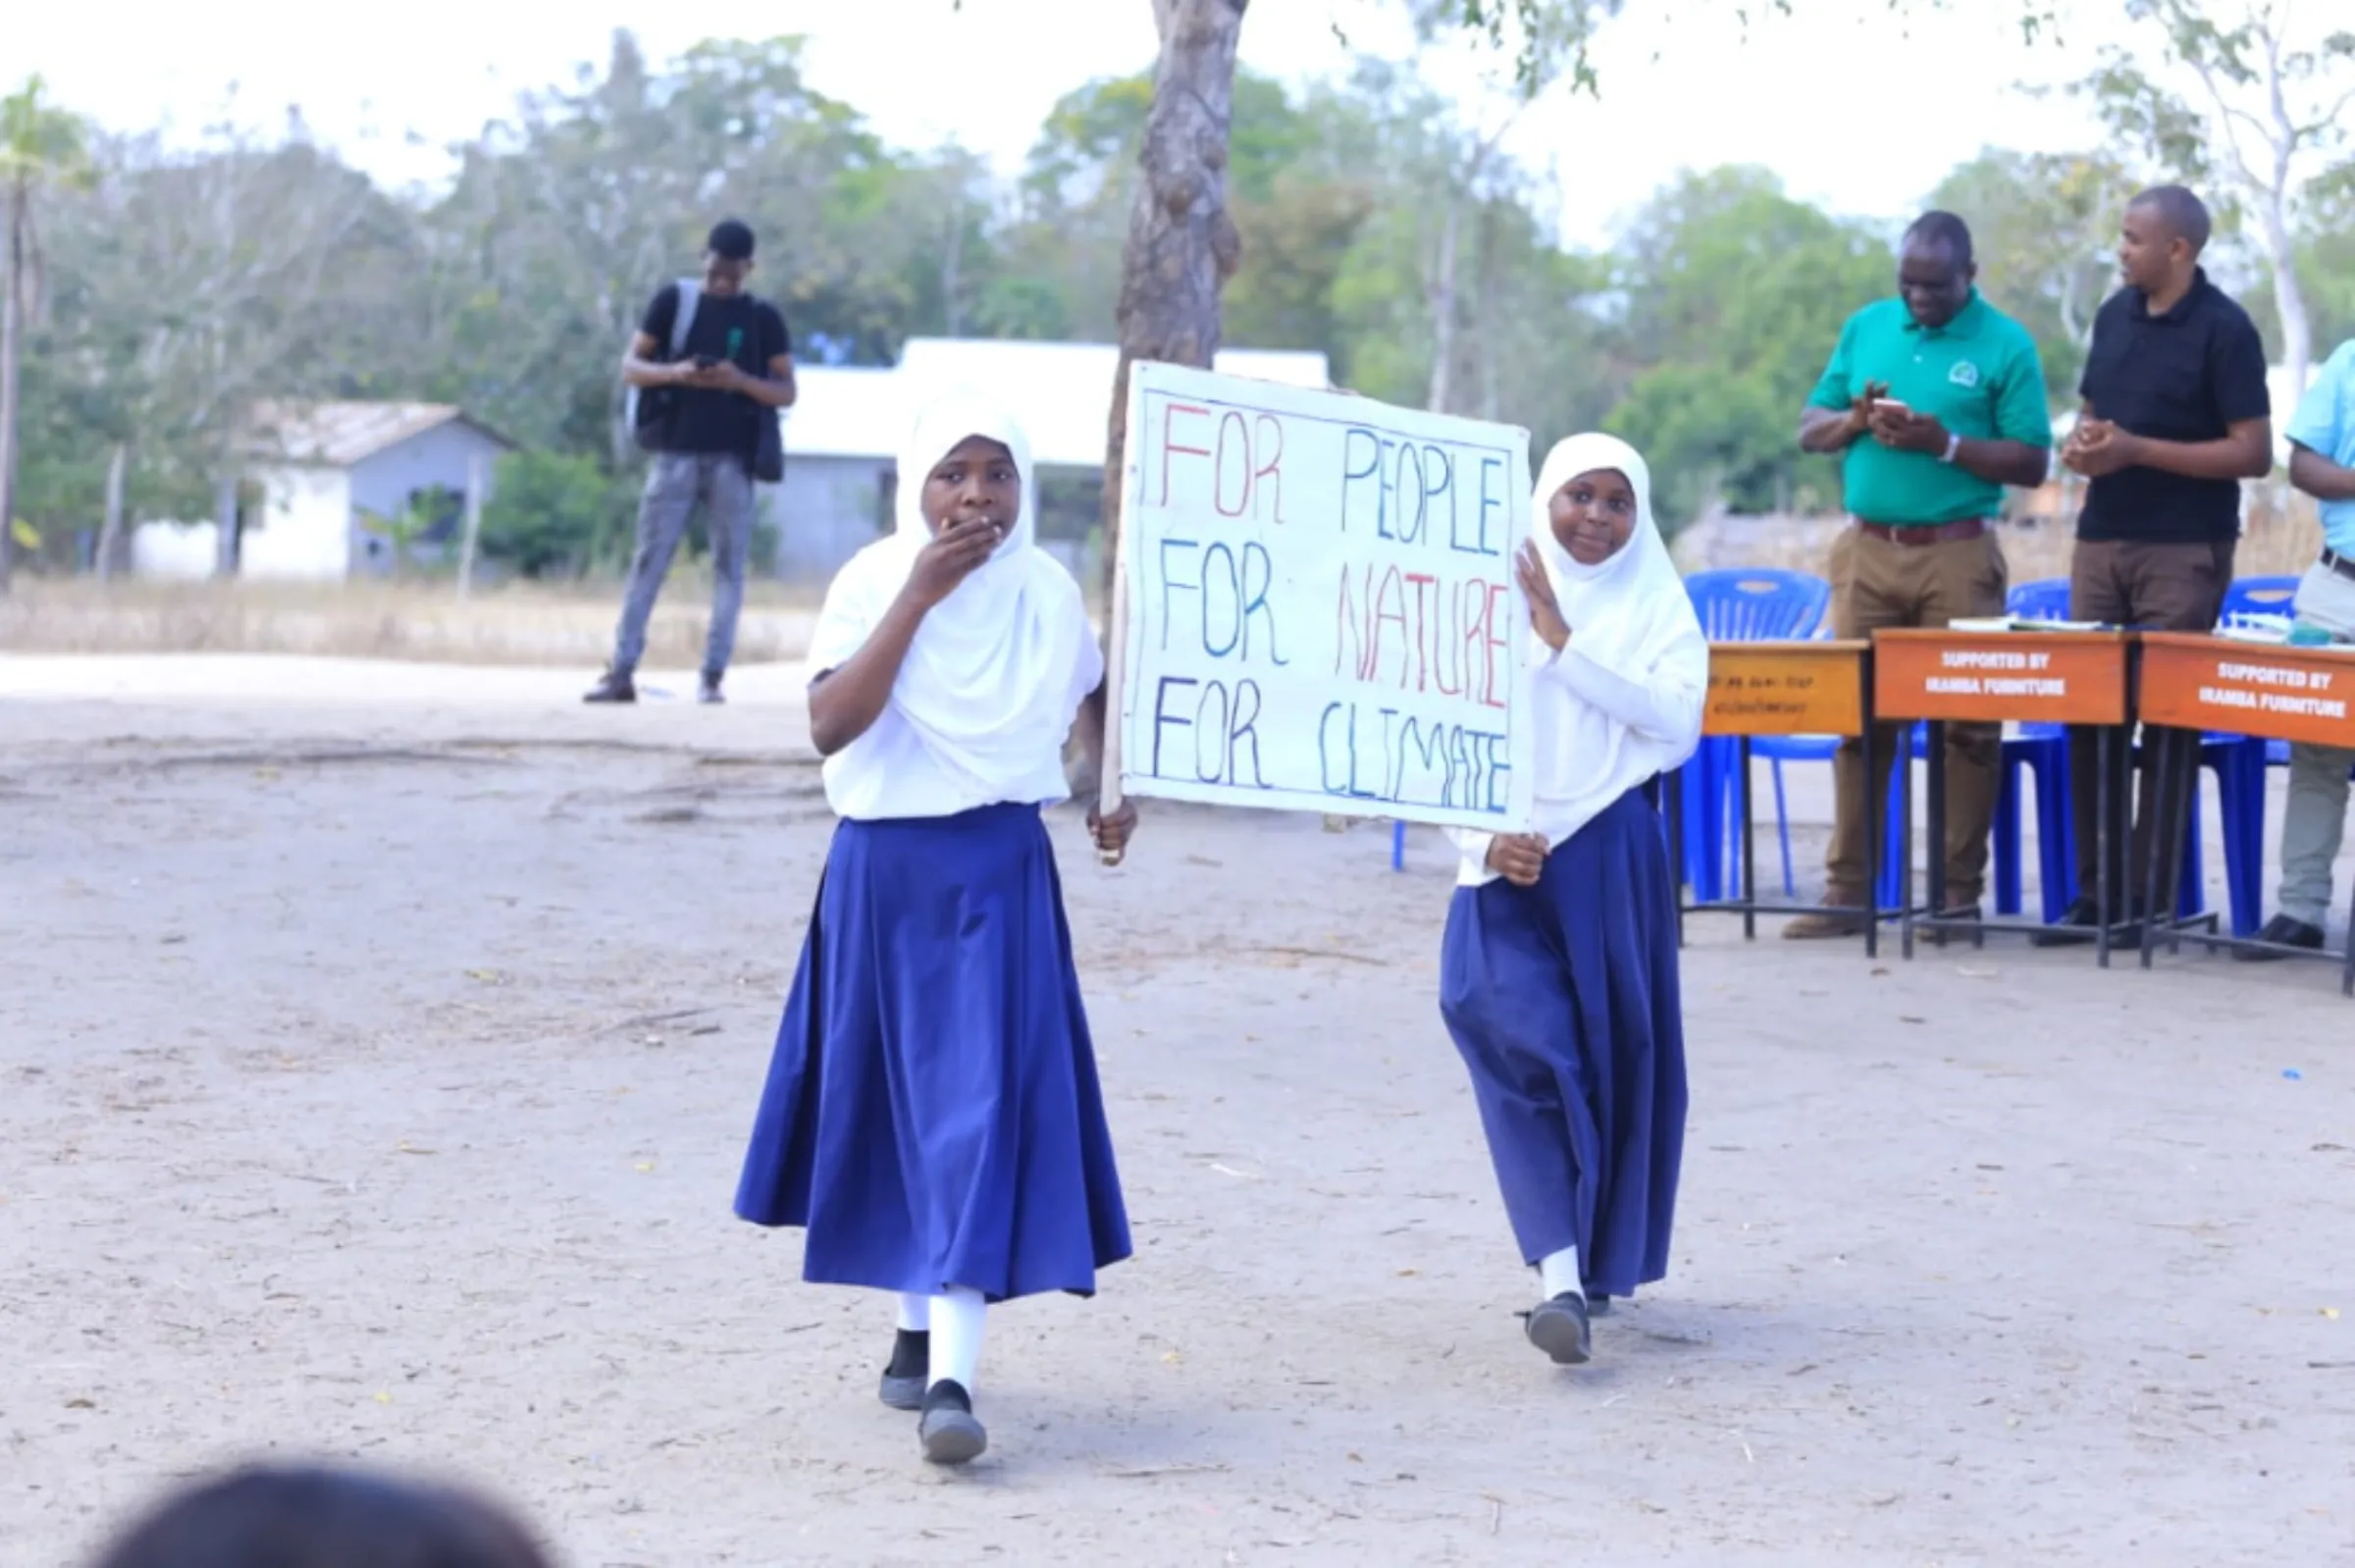 Two young students hold a sign reading ‘For People, For Nature, For Climate’ at a climate strike in the Kibaha district, Tanzania, October 9, 2022